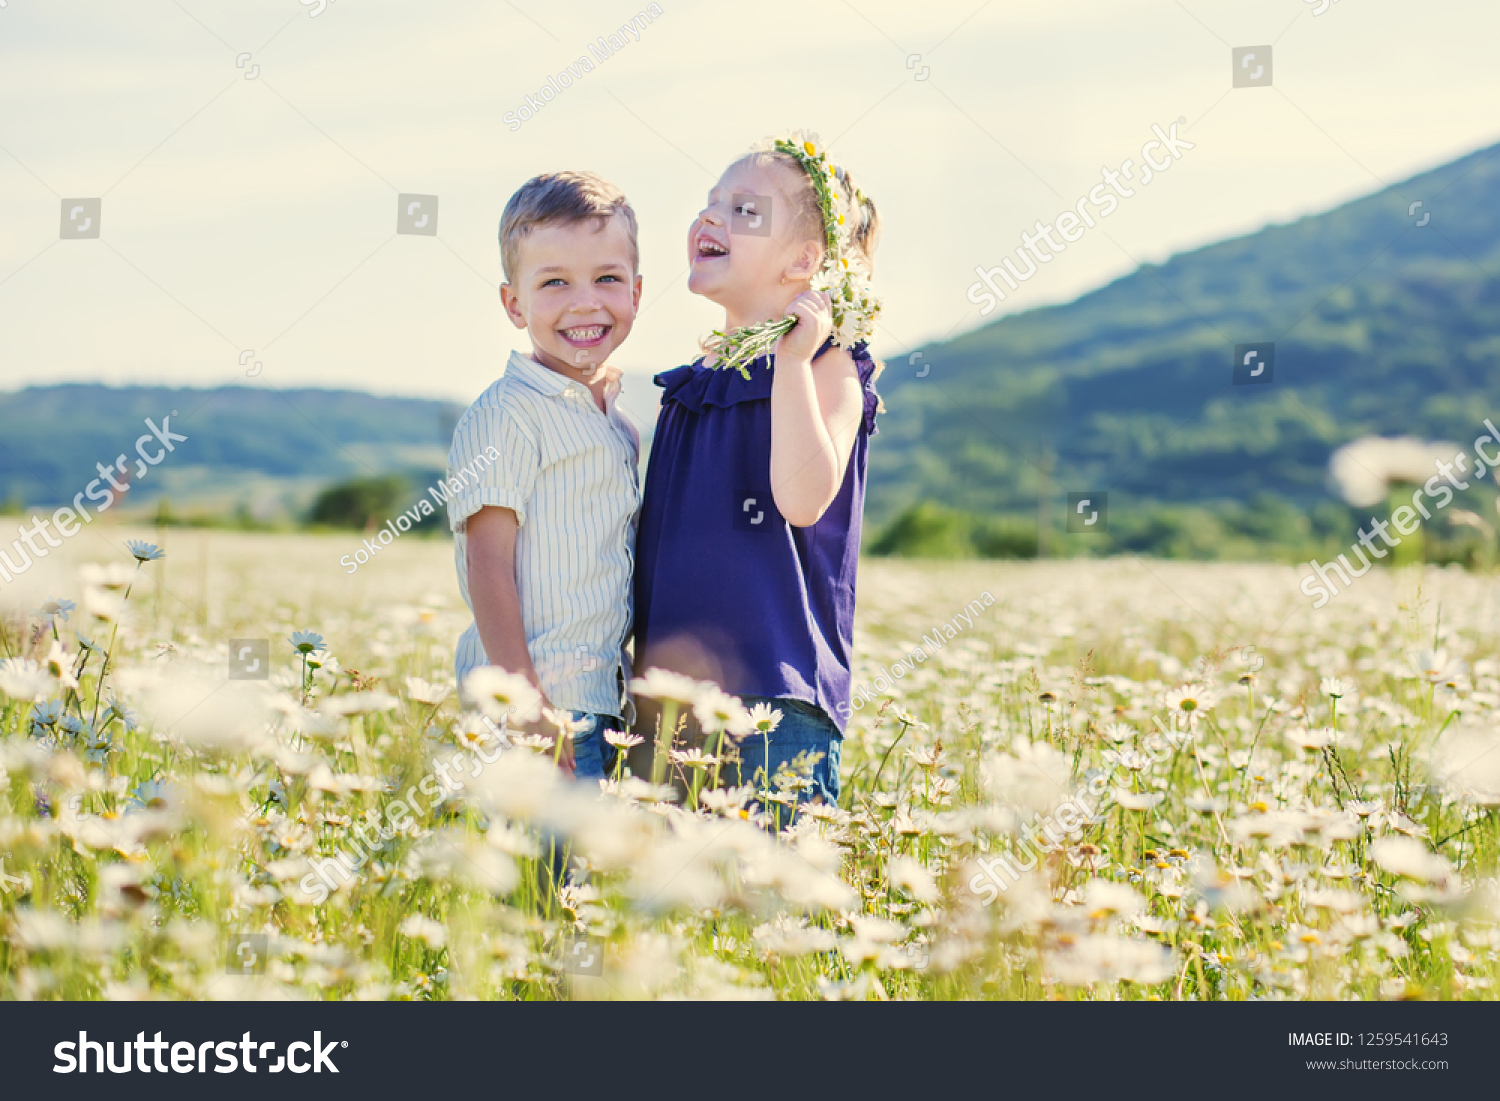 Lovely little children in the field of daisies. #1259541643